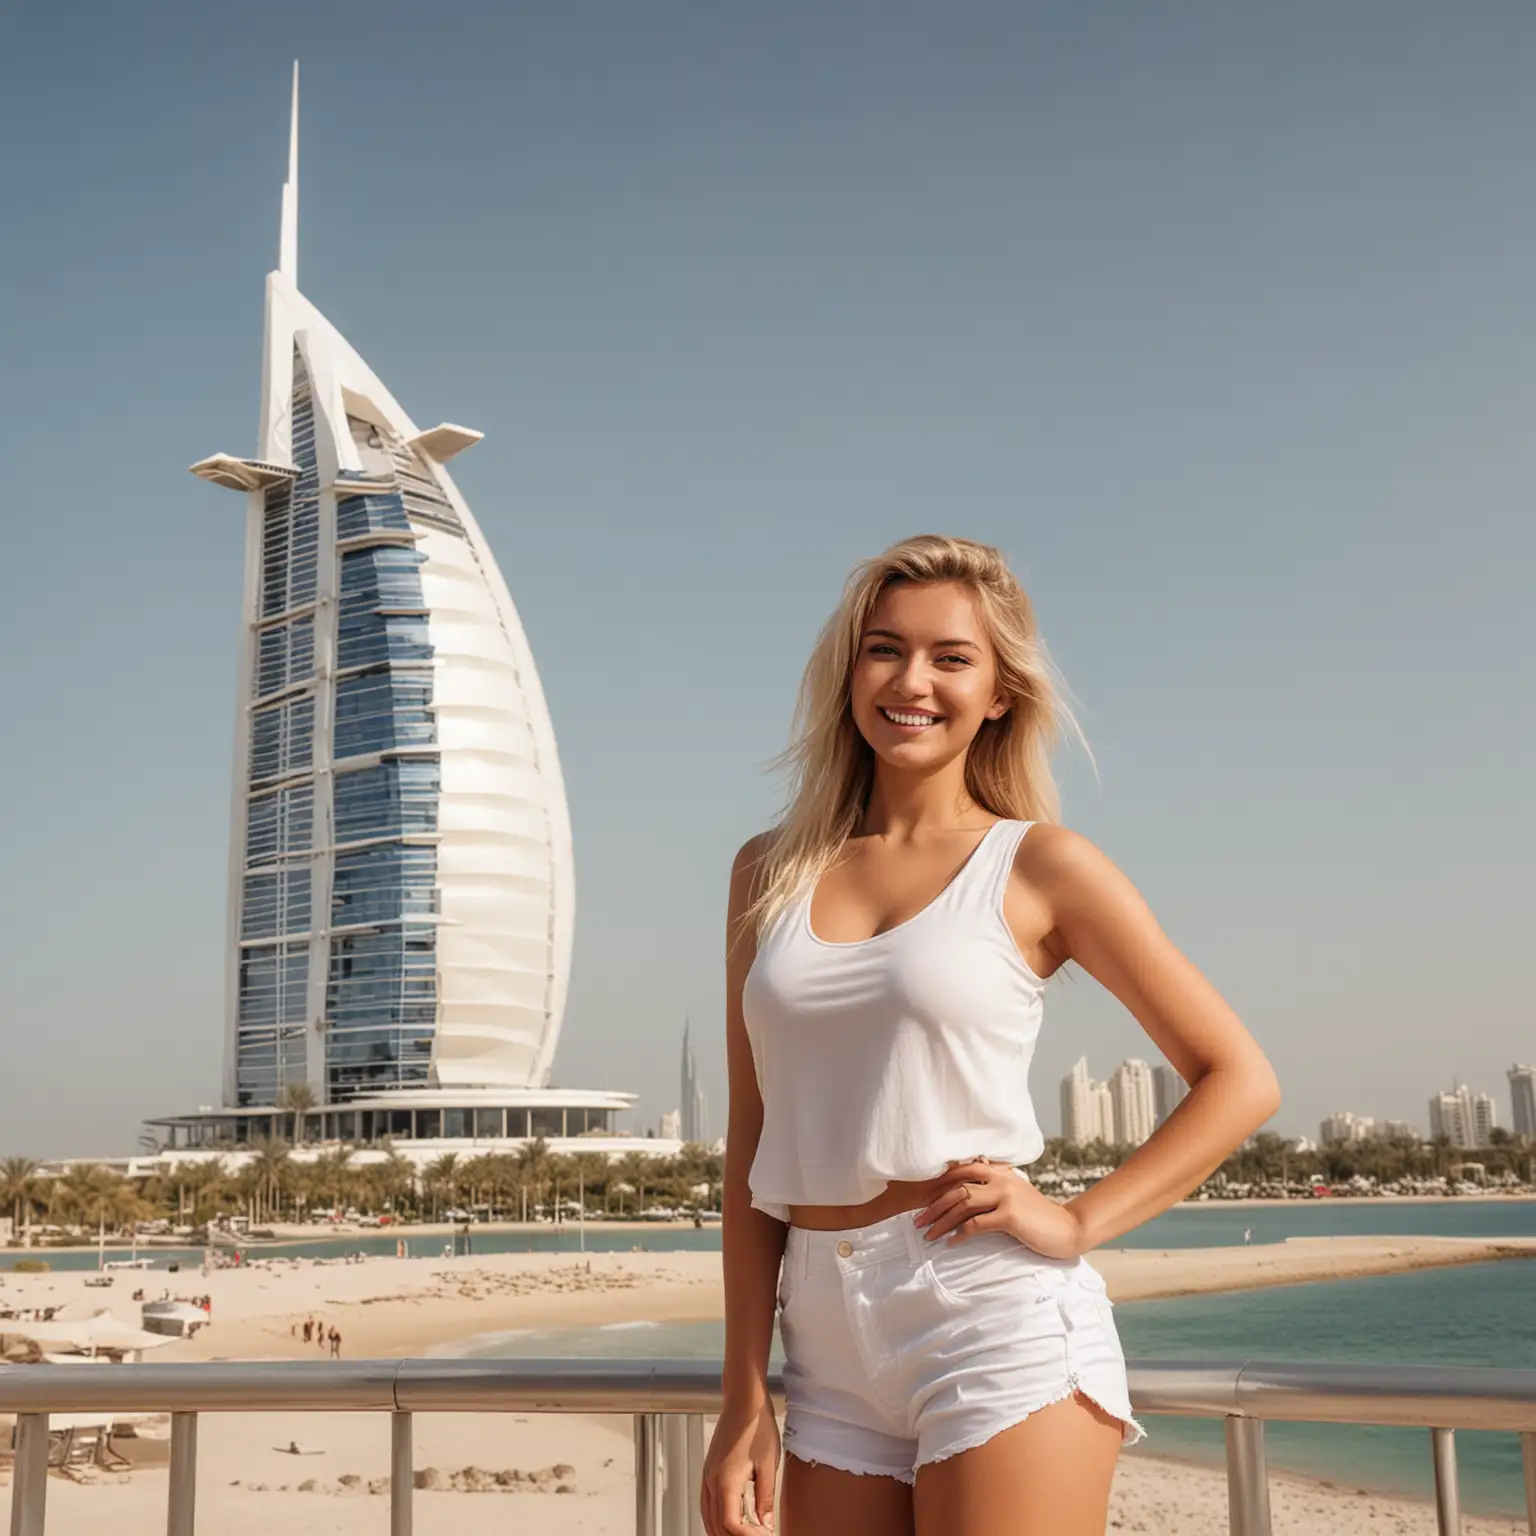 beautiful Polish woman, smiling with a lovely tan extra large sized natural breasts, long legs, and blond hair wearing a white tank top and classy dressy shorts standing in front of the Burj Al Arab 7-Star Hotel in Dubai with no other structures in sight.